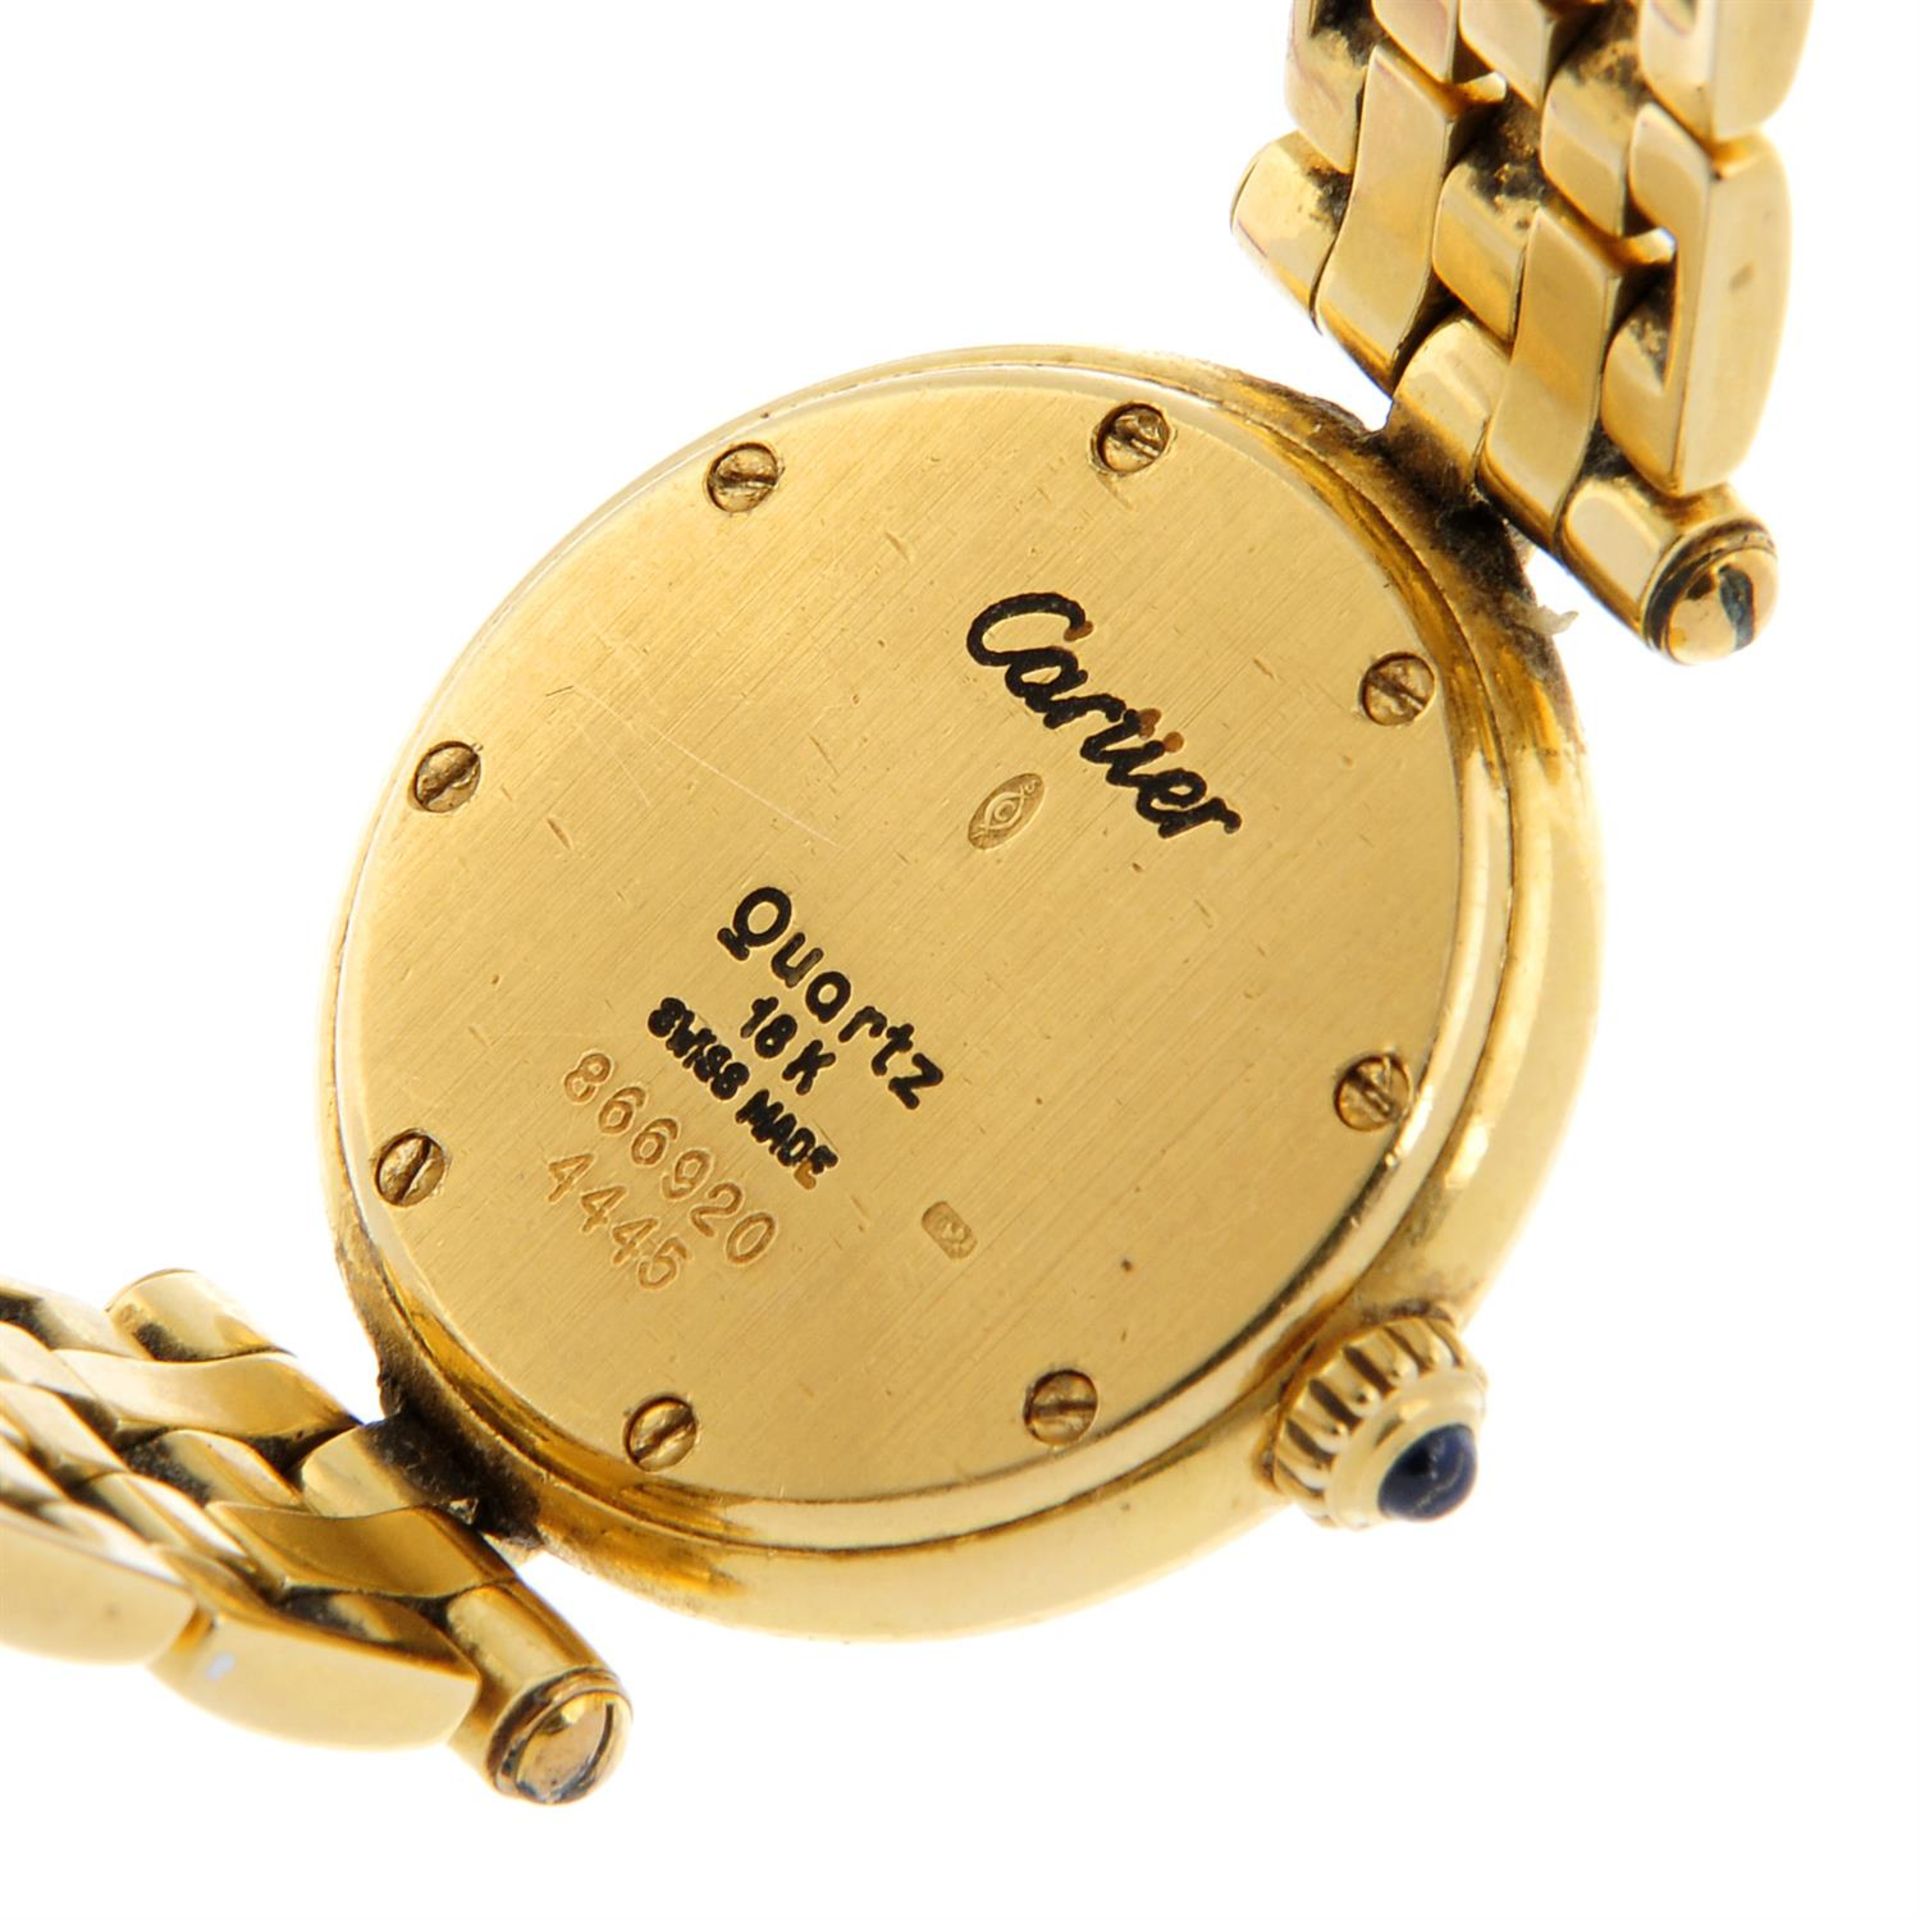 CARTIER - an 18ct yellow gold Panthere Vendome bracelet watch. - Image 5 of 6